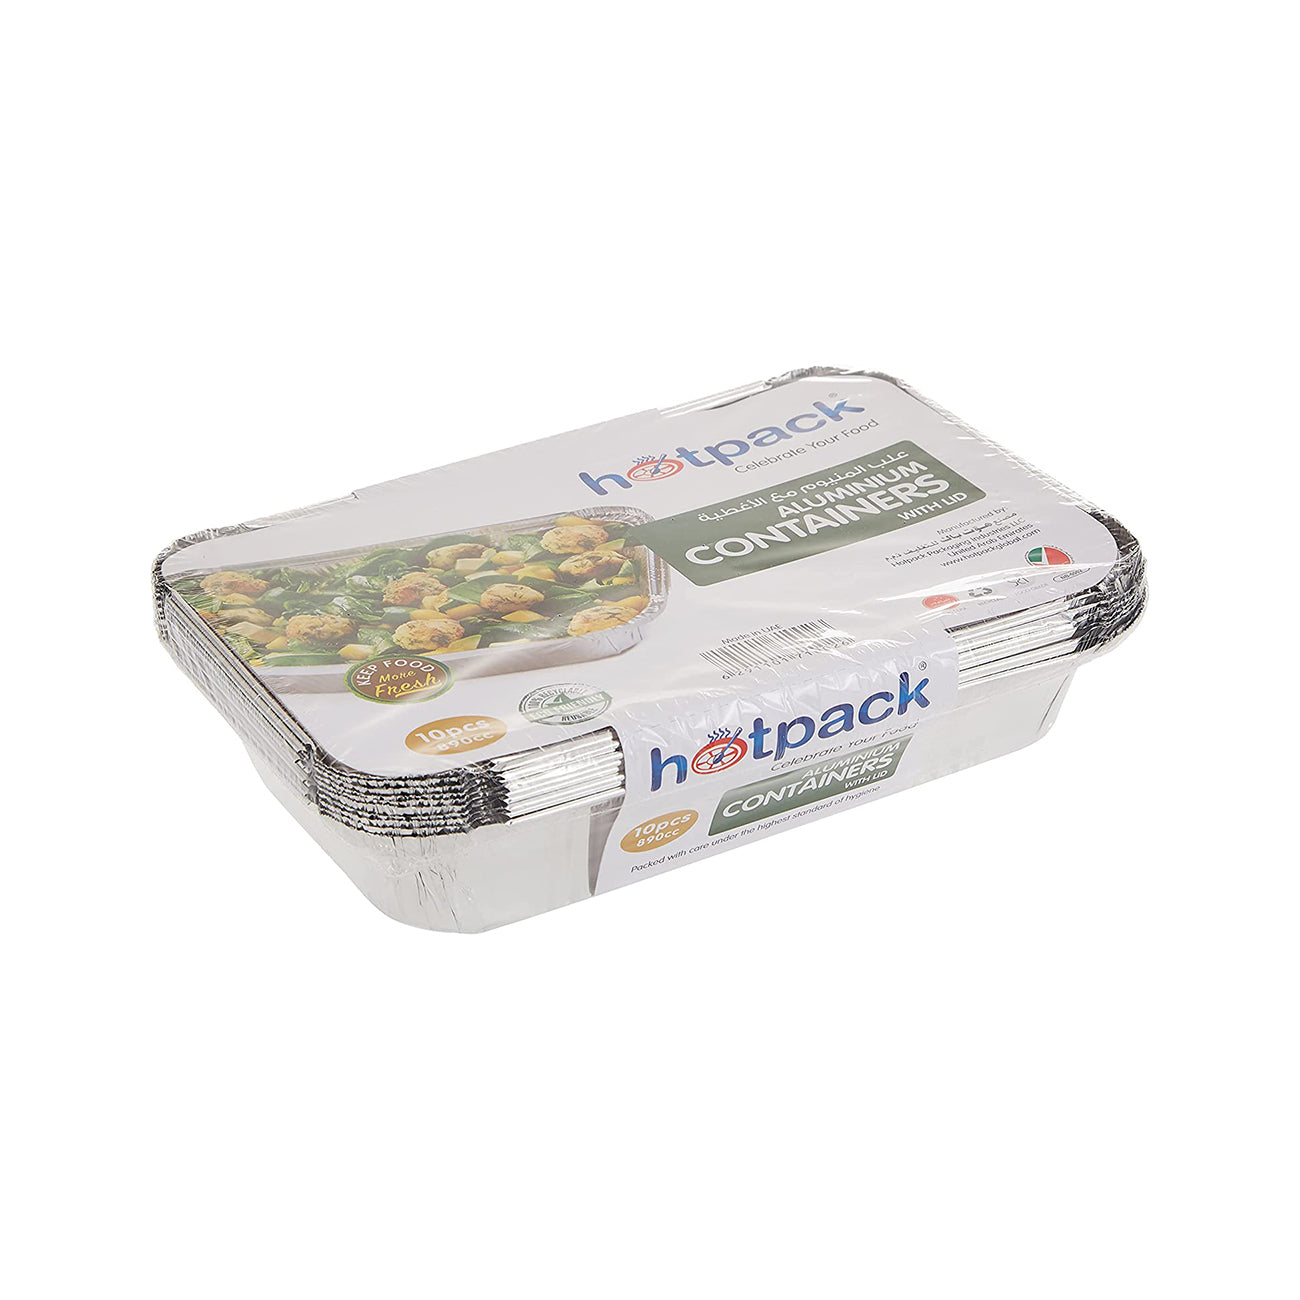 Hotpack Disposable Food Storage, Take away, Aluminium Food Container Silver with Lid Rectangular 890cc, 10 PCS